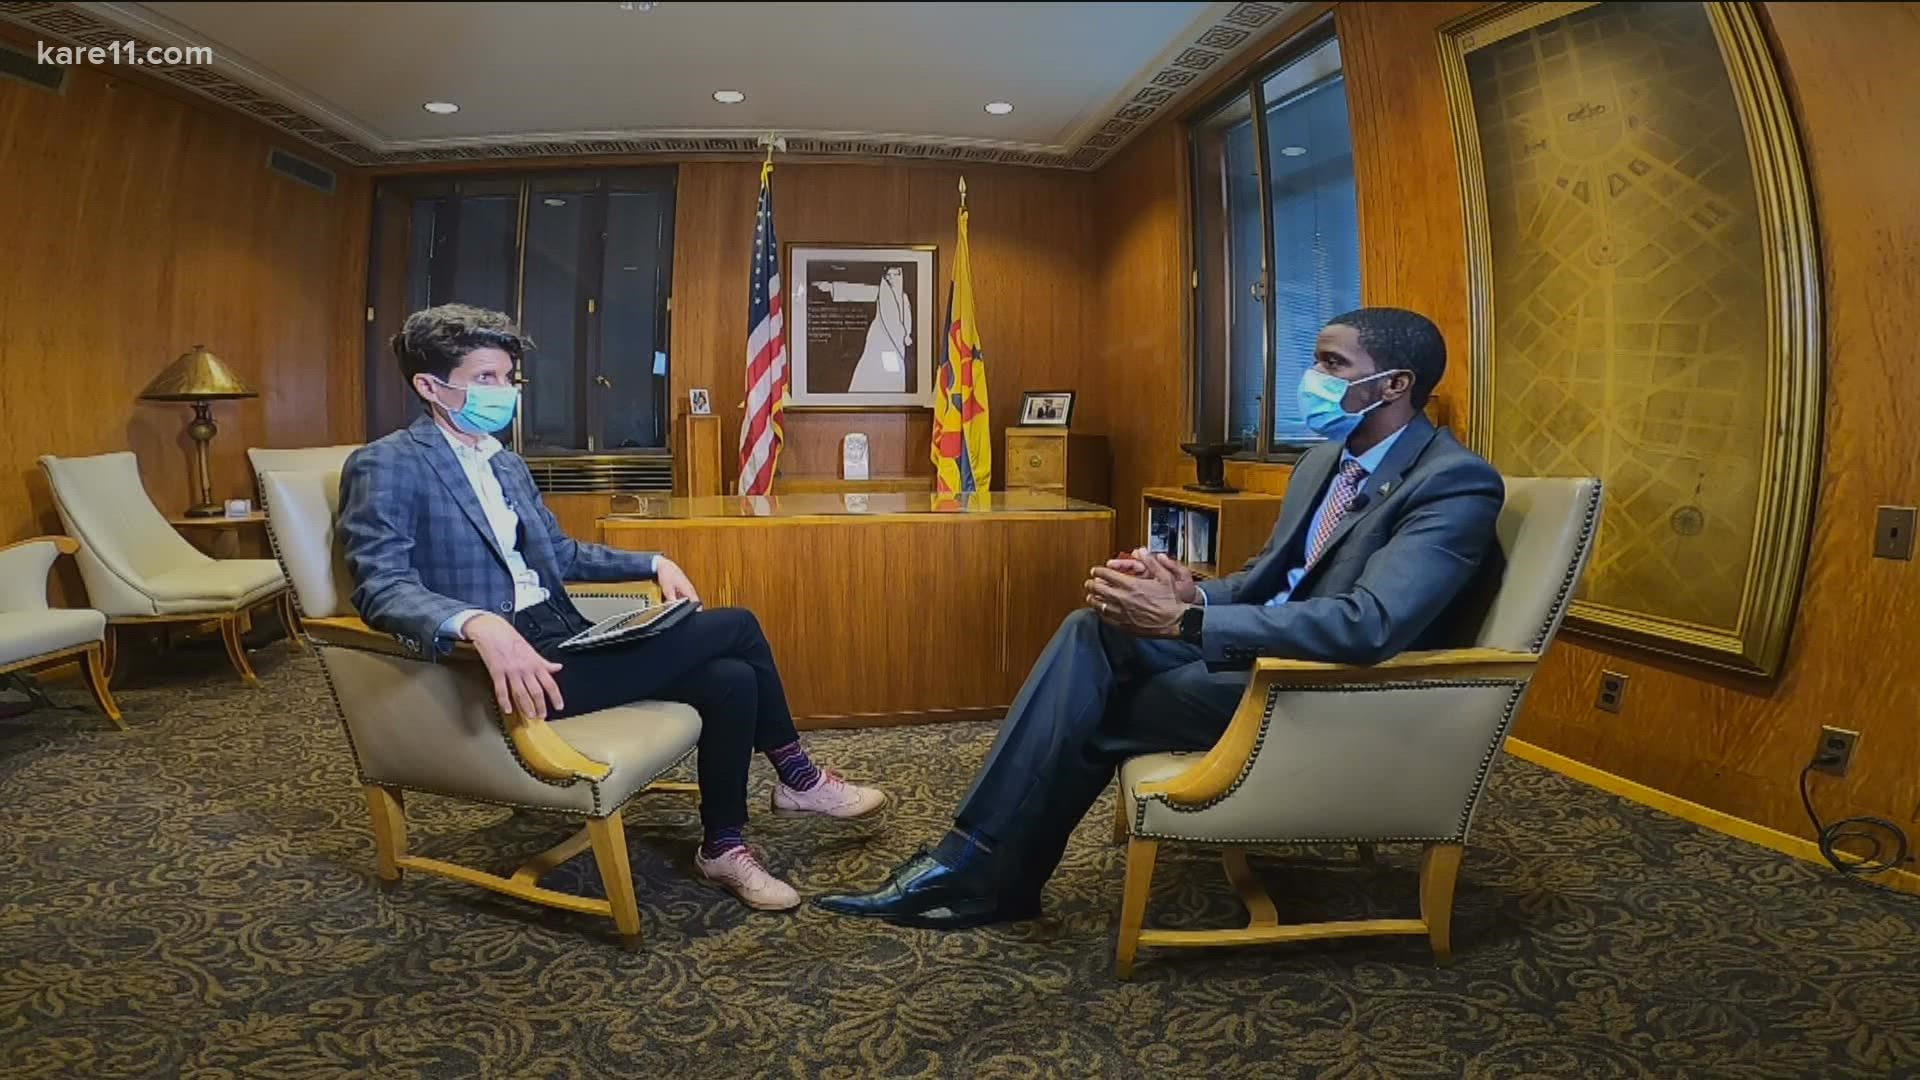 Mayor Carter sits down with KARE's Jana Shortal for a one-on-one interview following last weekend's mass shooting.